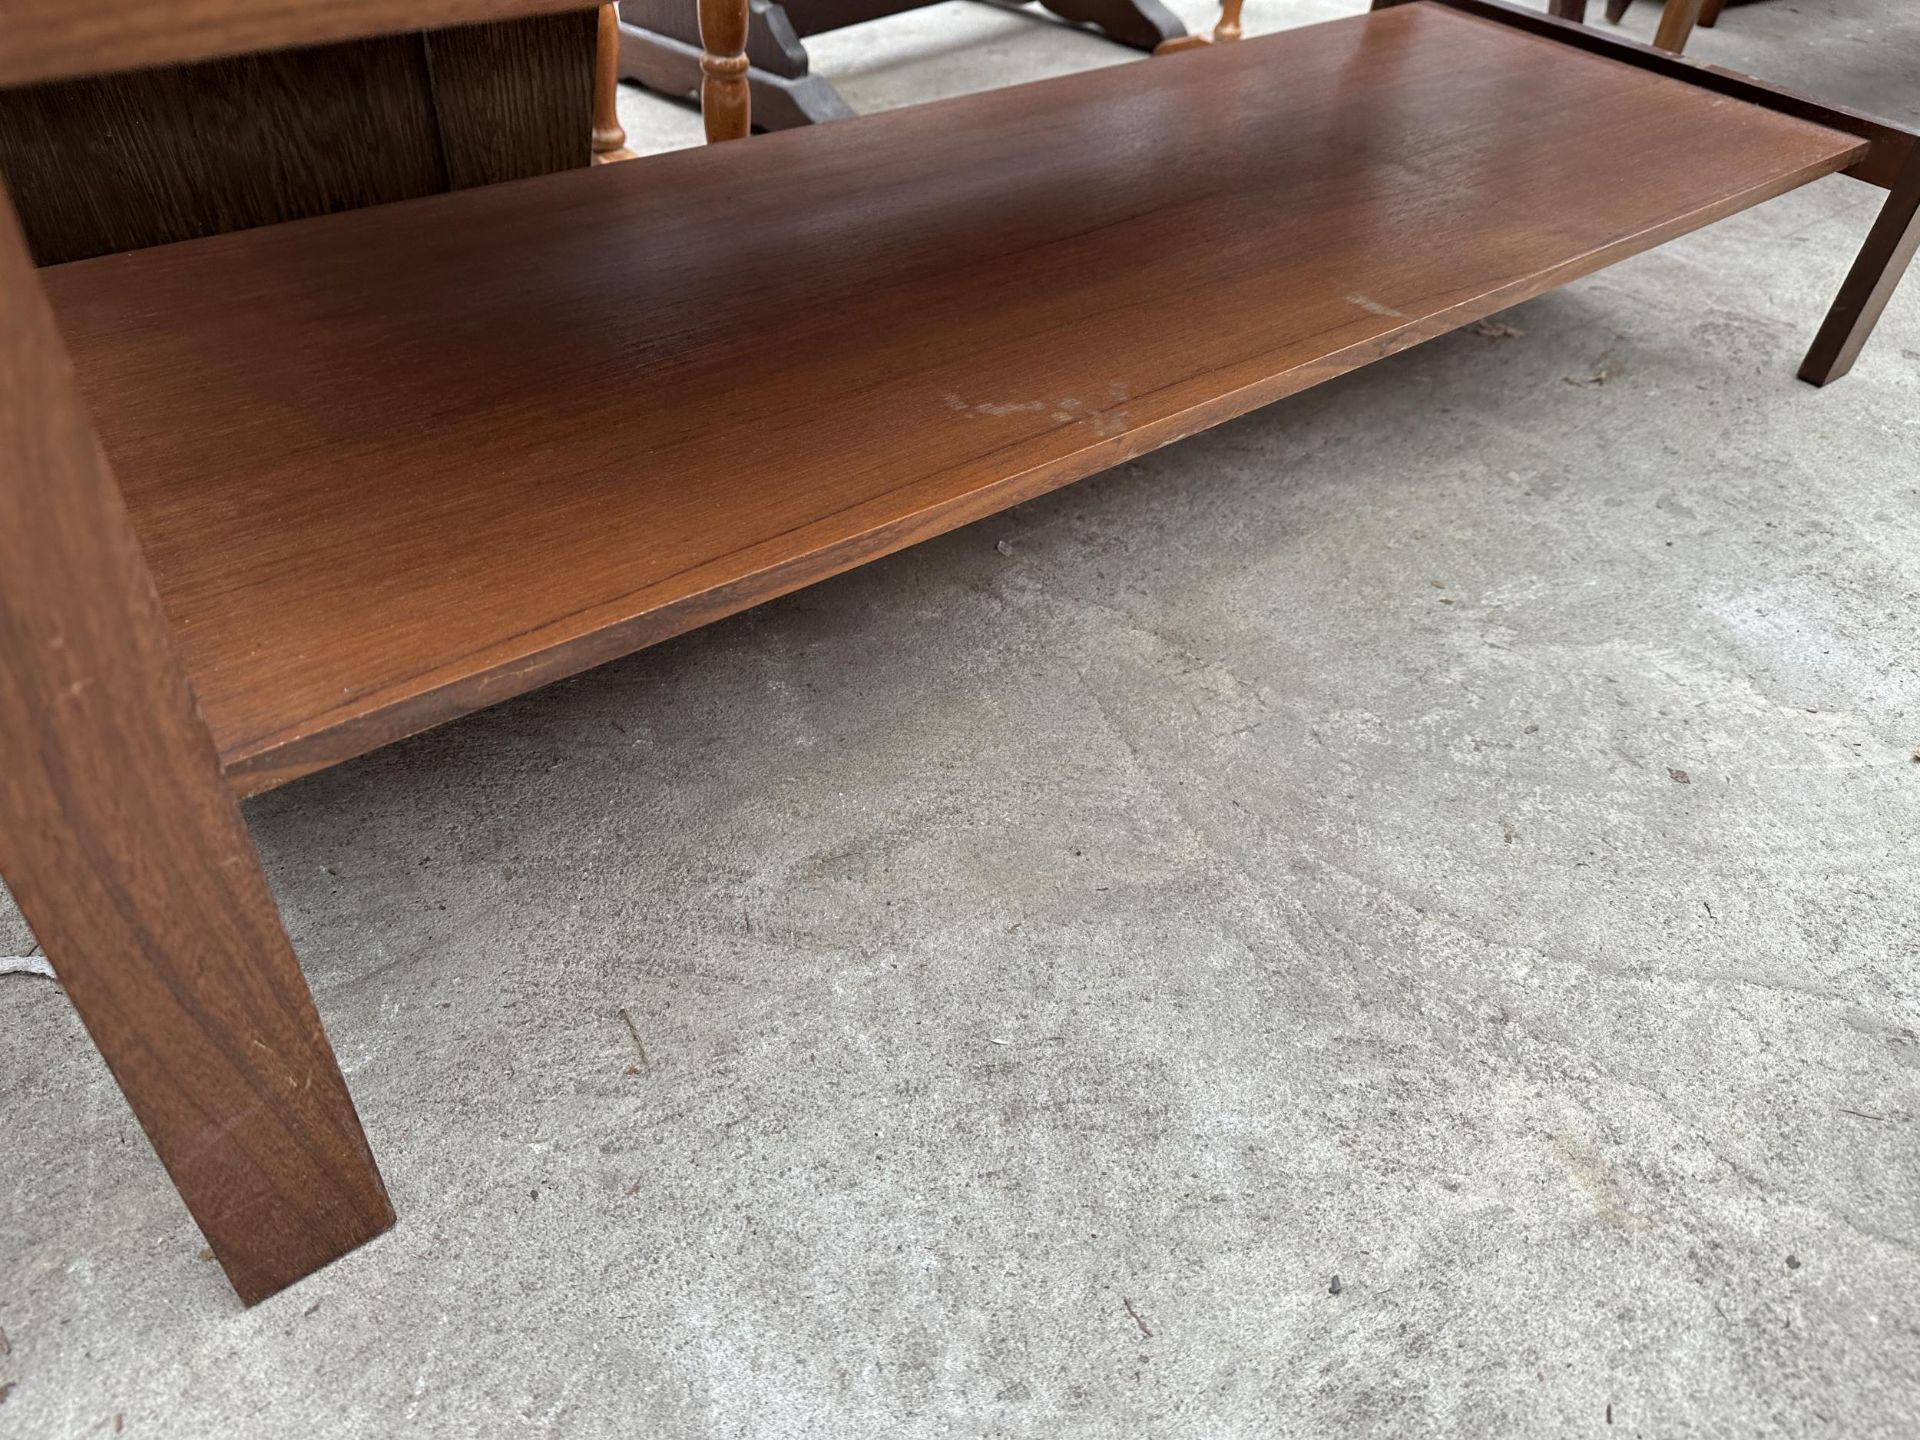 A RETRO TEAK TWO TIER COFFEE TABLE, 40" X 16" - Image 3 of 3